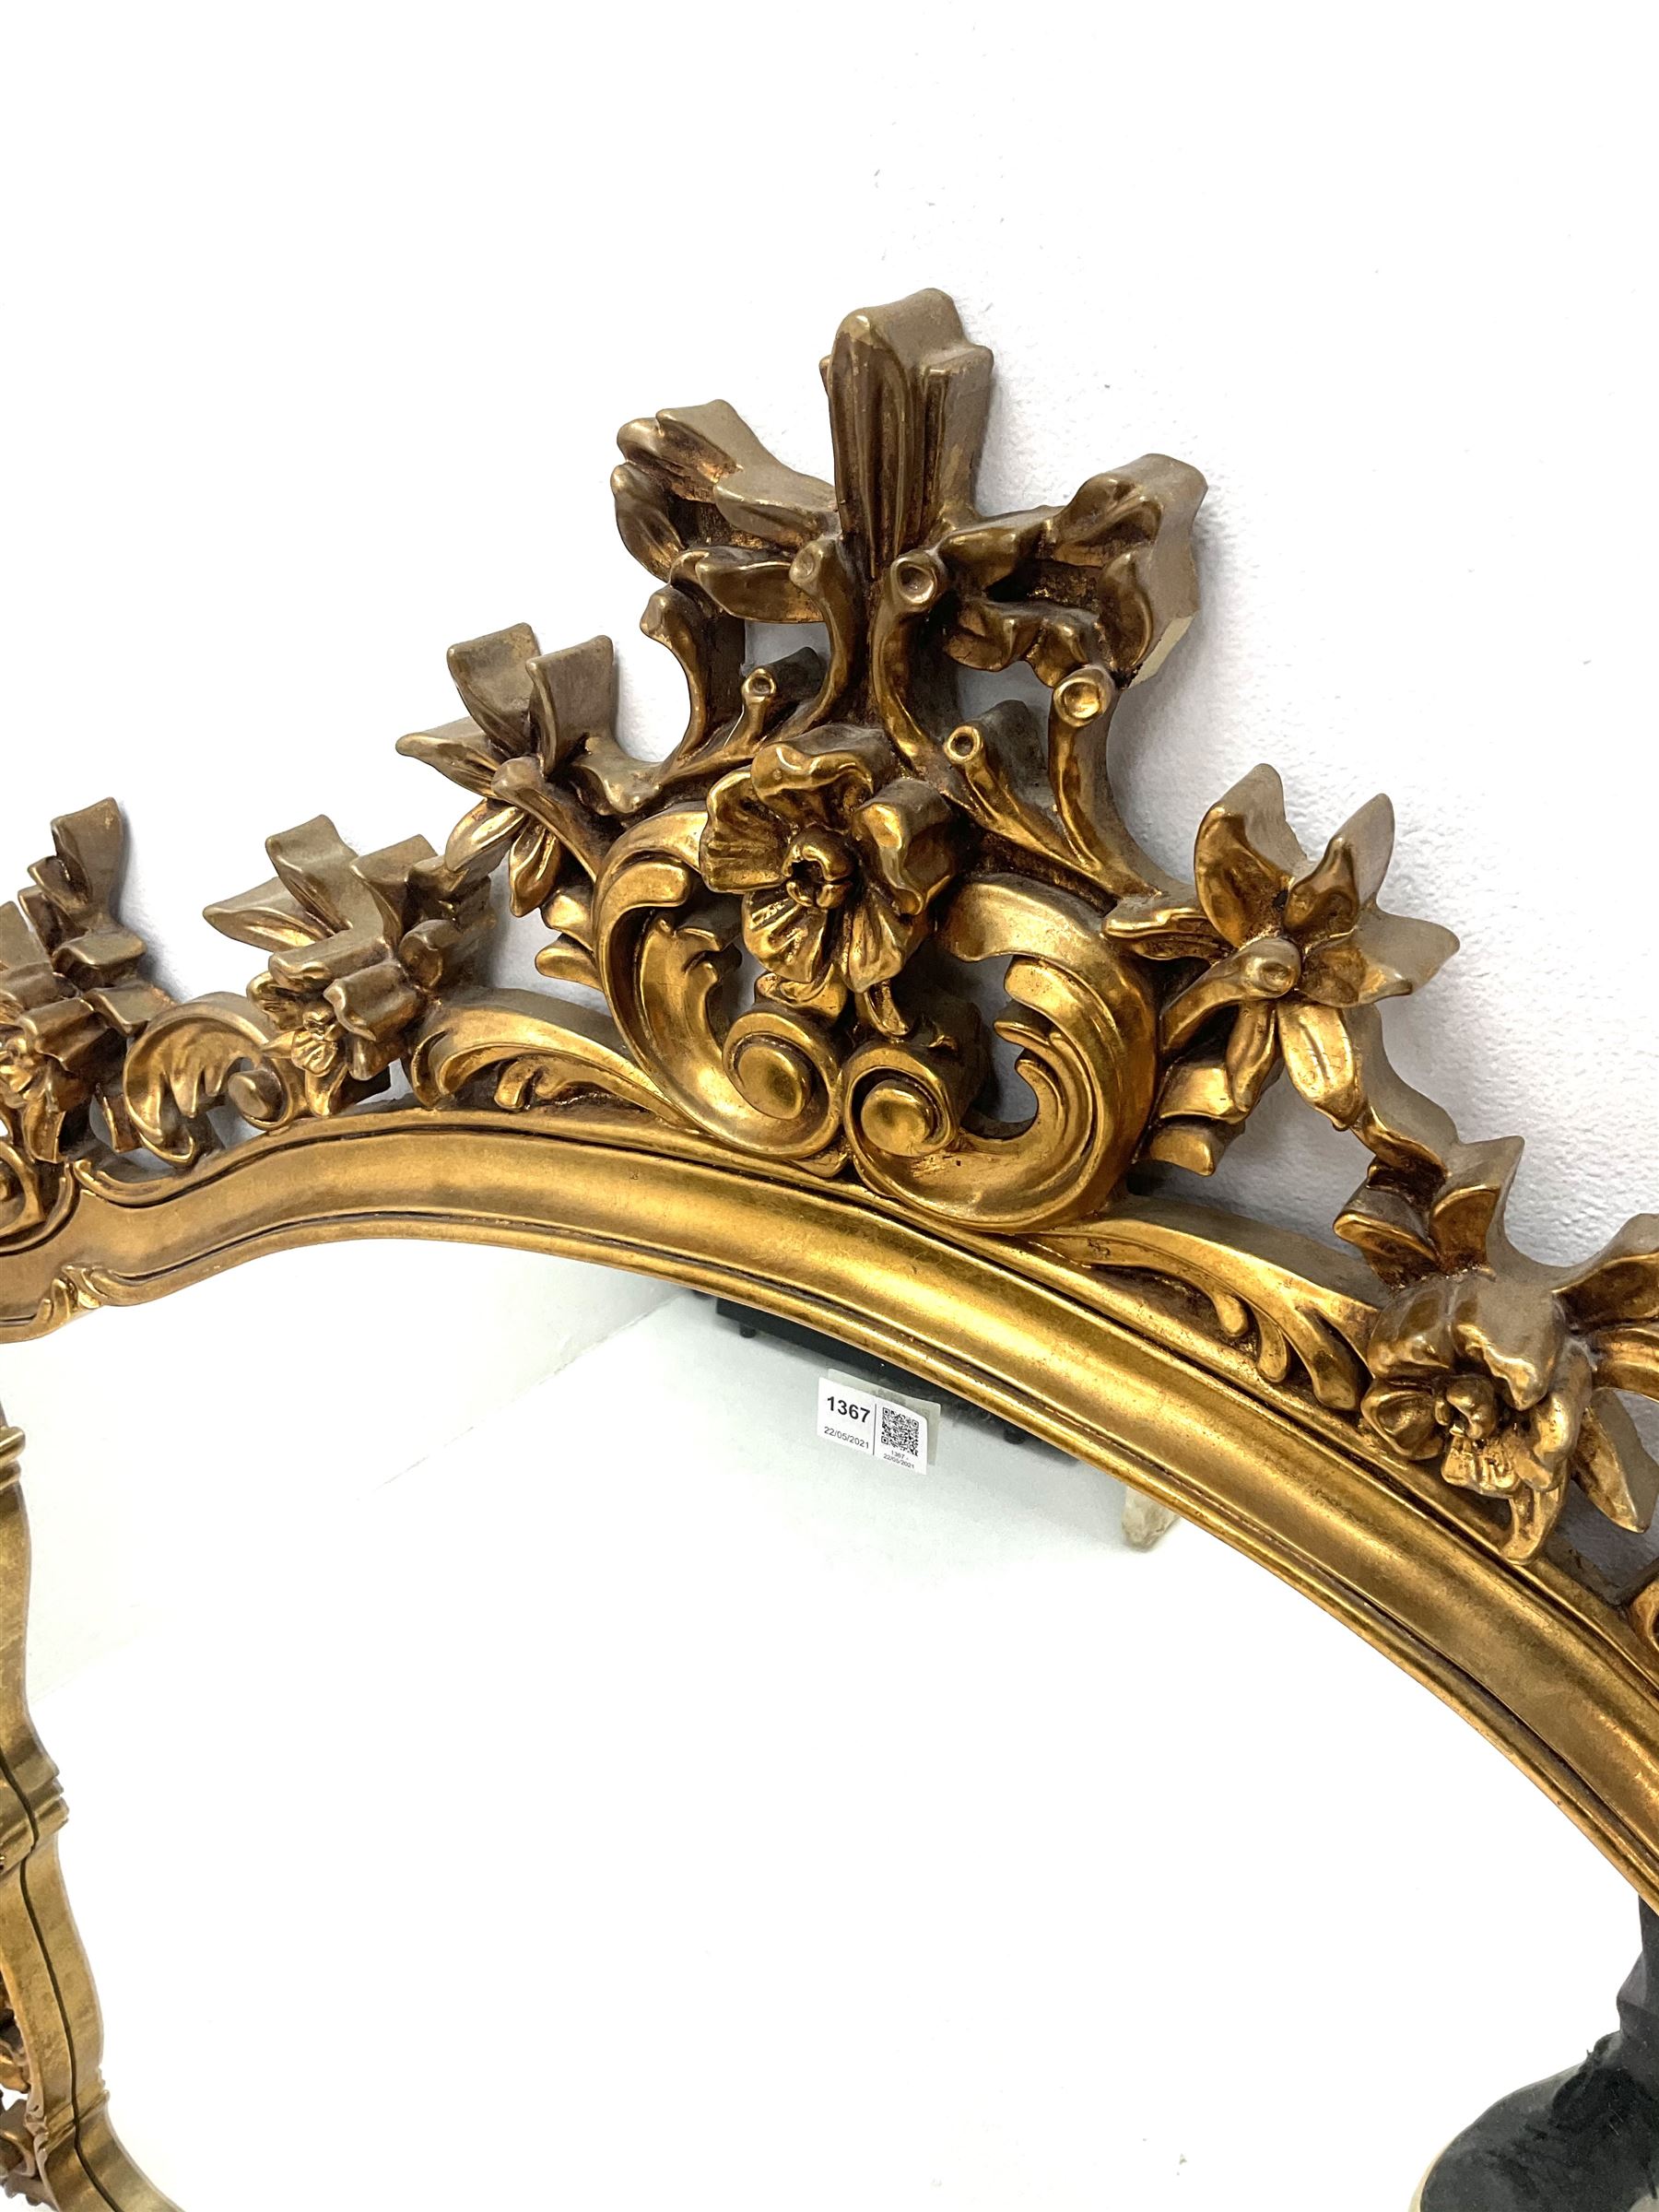 Chippendale style ornate gilt framed over mantle mirror - Image 2 of 3